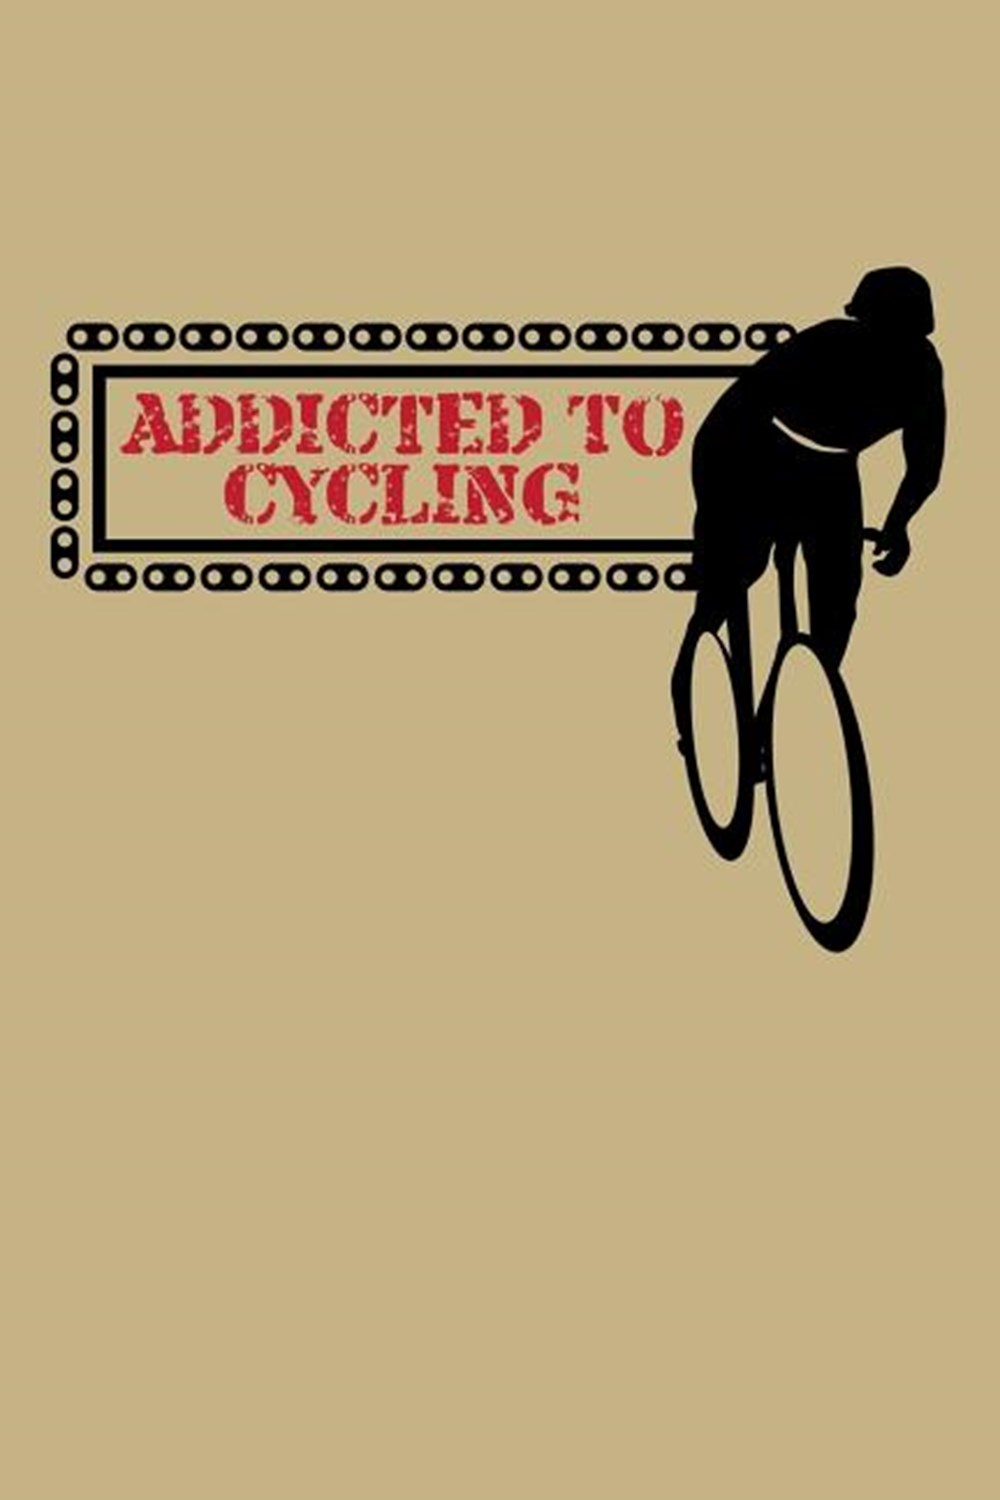 Addicted To Cycling Blank Paper Sketch Book - Artist Sketch Pad Journal for Sketching, Doodling, Dra